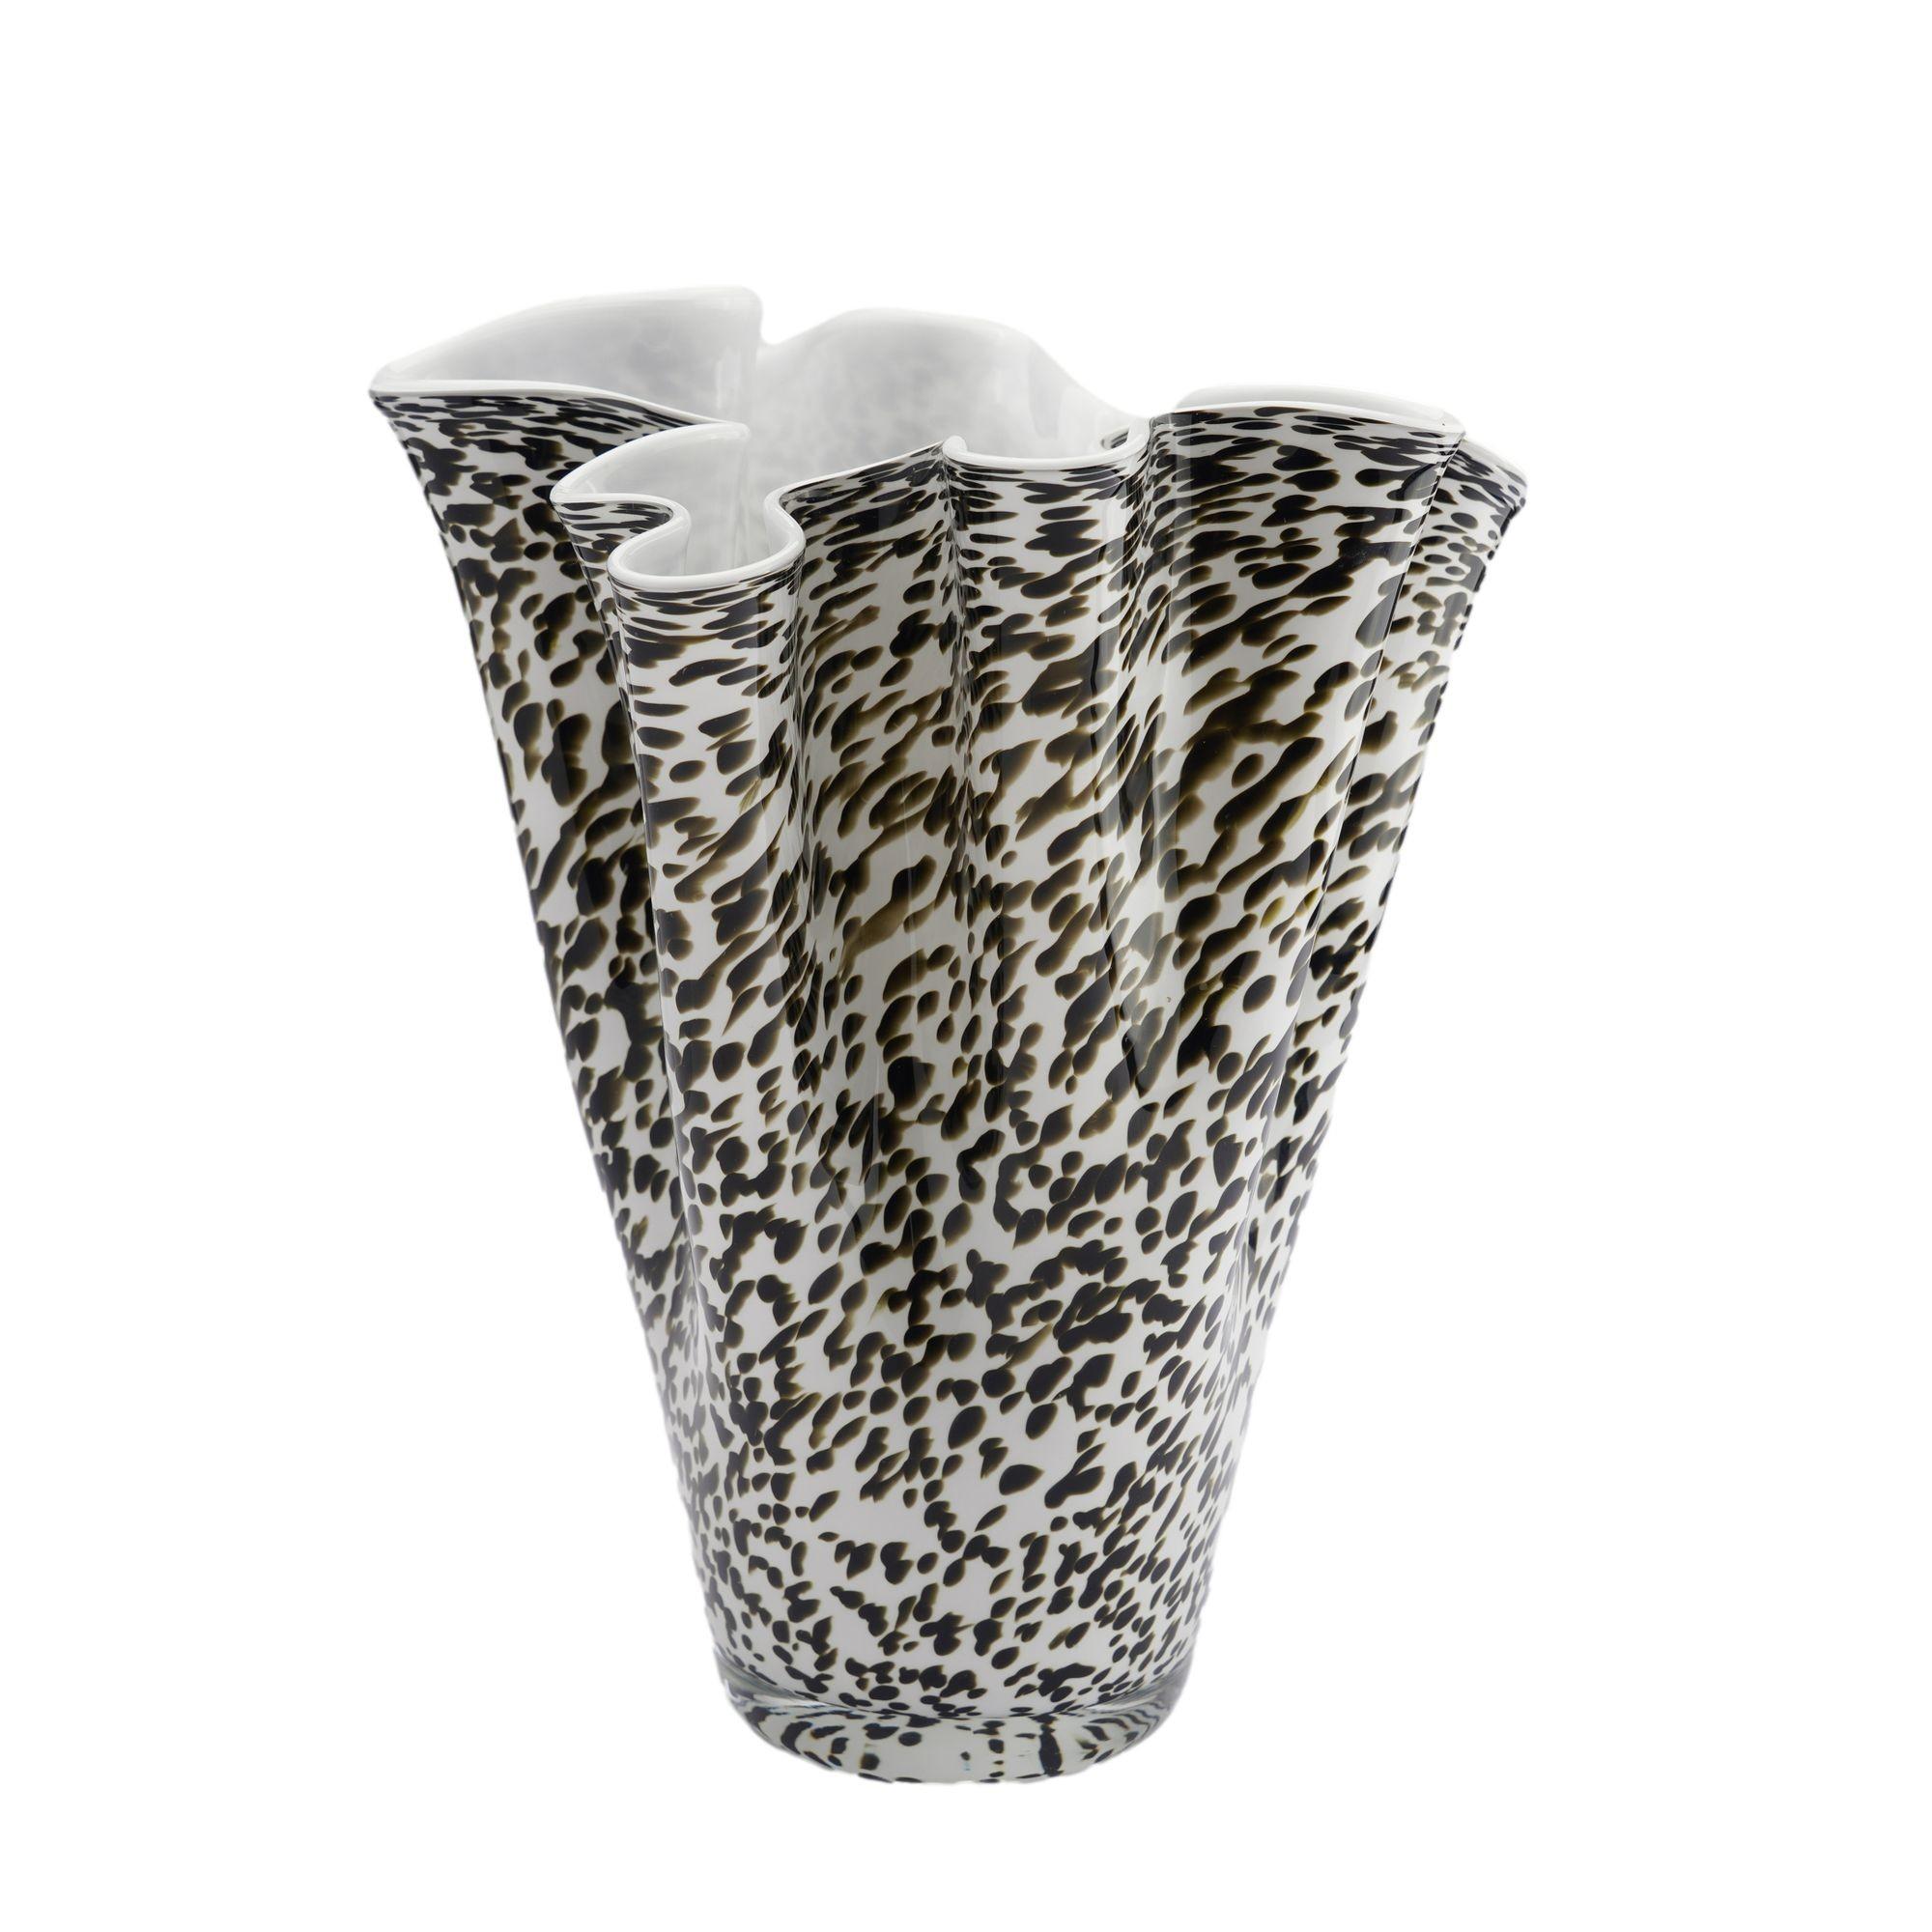 Hand blown dark olive and white mottled glass Fazzoletto handkerchief vase with cut and polished pontil.
Murano, Italy, mid 20th century.